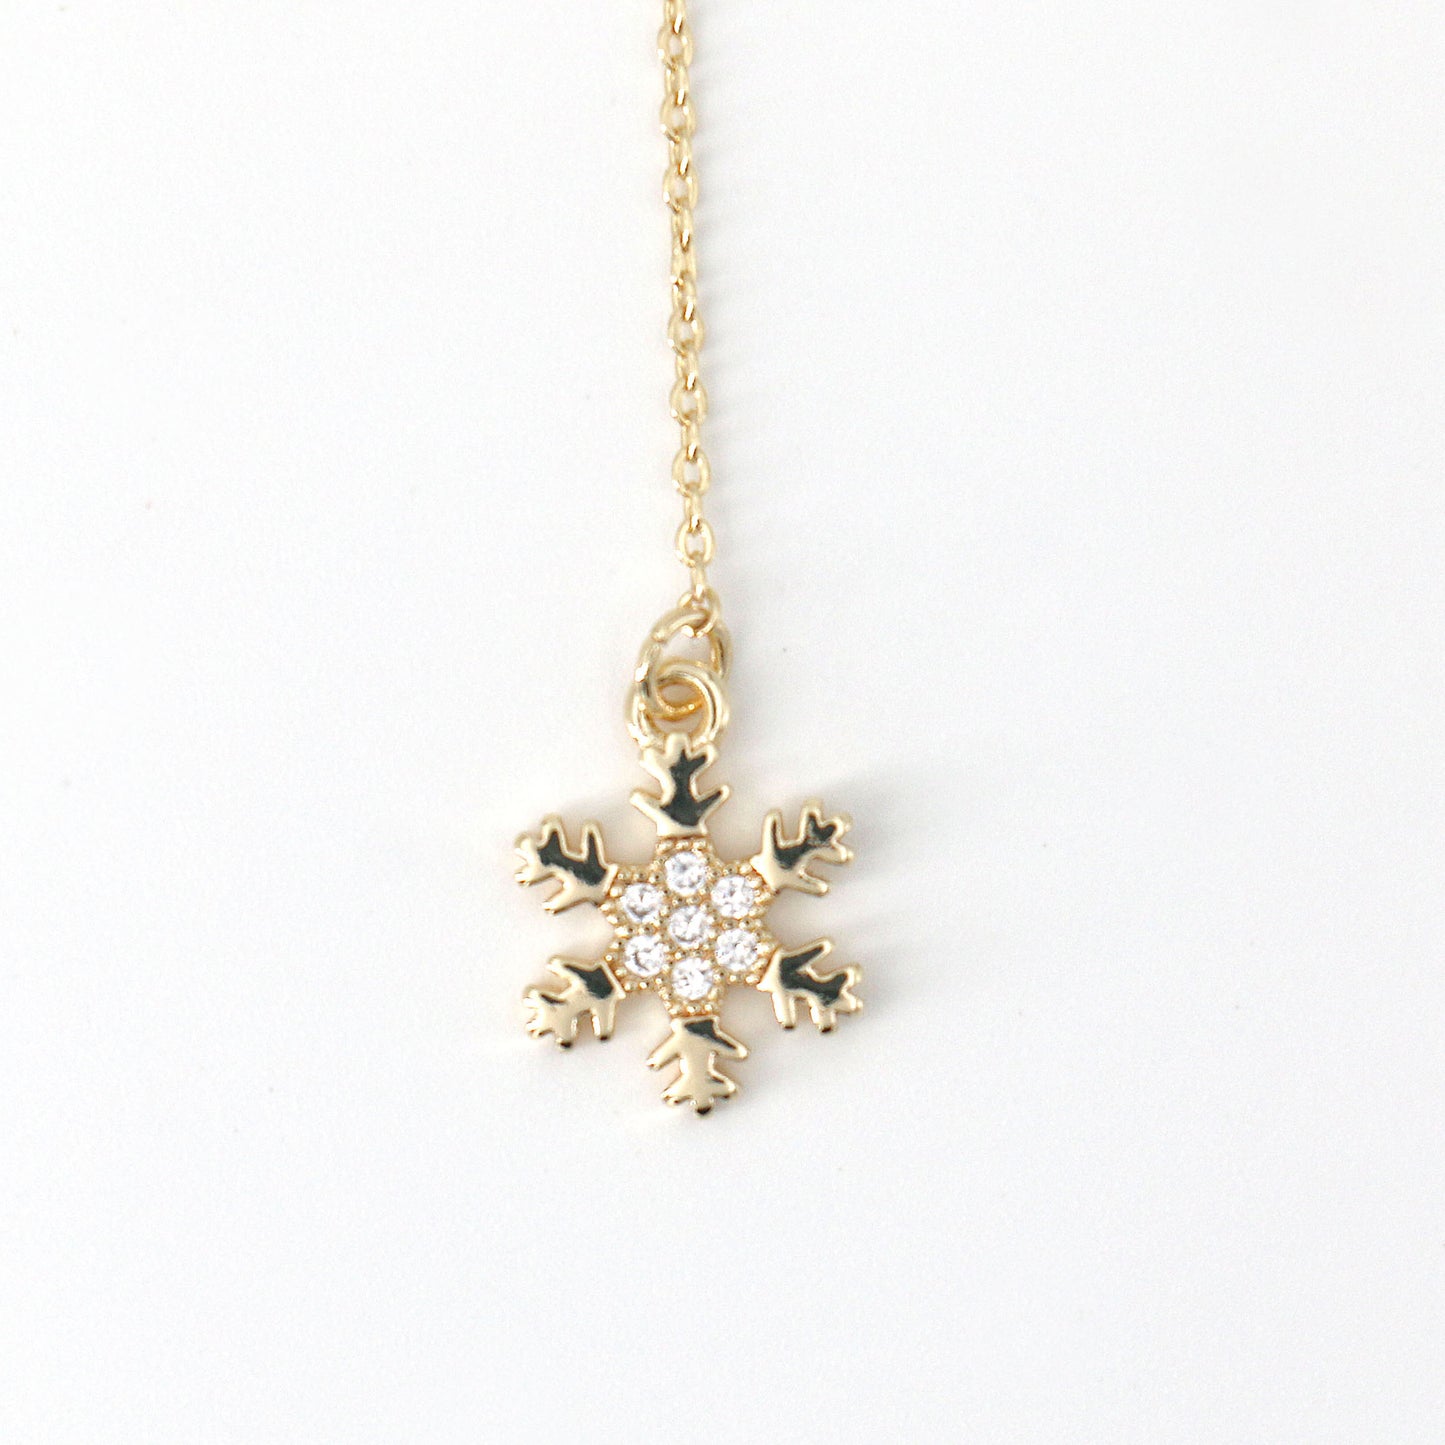 01 Fashion snowflake and deer necklace